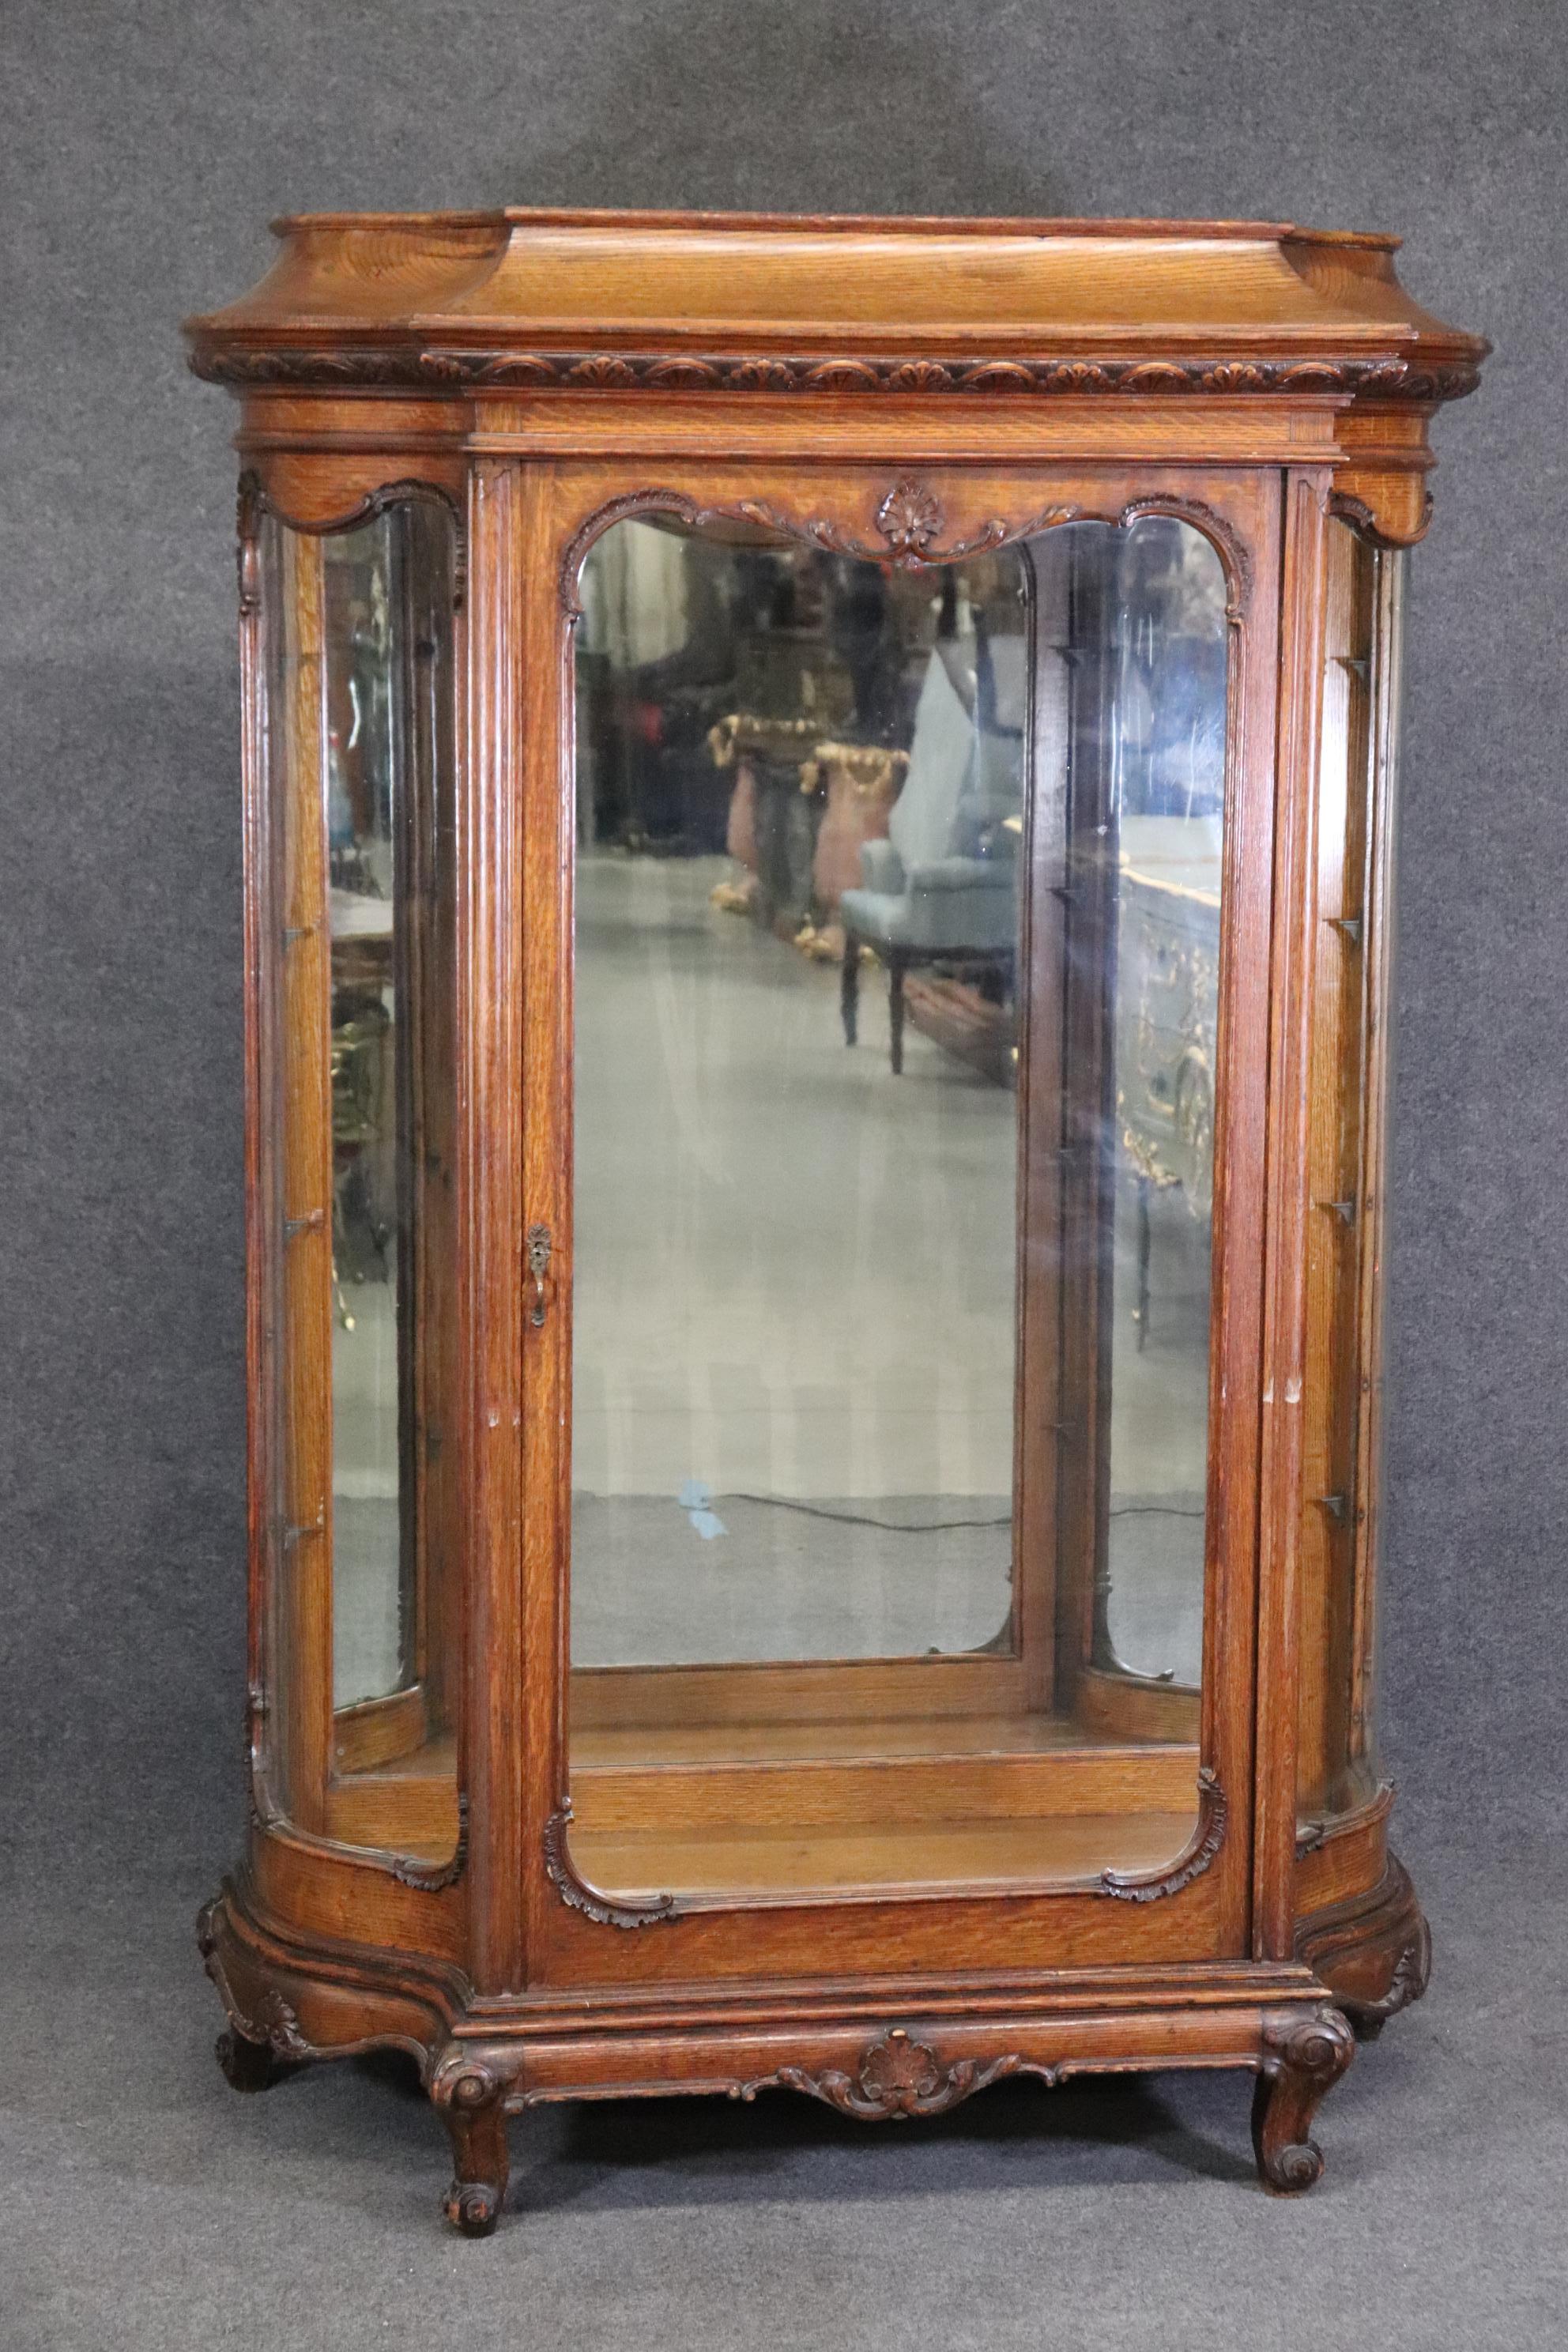 This is a very beautiful and original American Victorian solid oak china cabinet or vitrine. Measures 77.5 tall x 53 wide x 21 deep. Dates to the 1880s era and is American. 